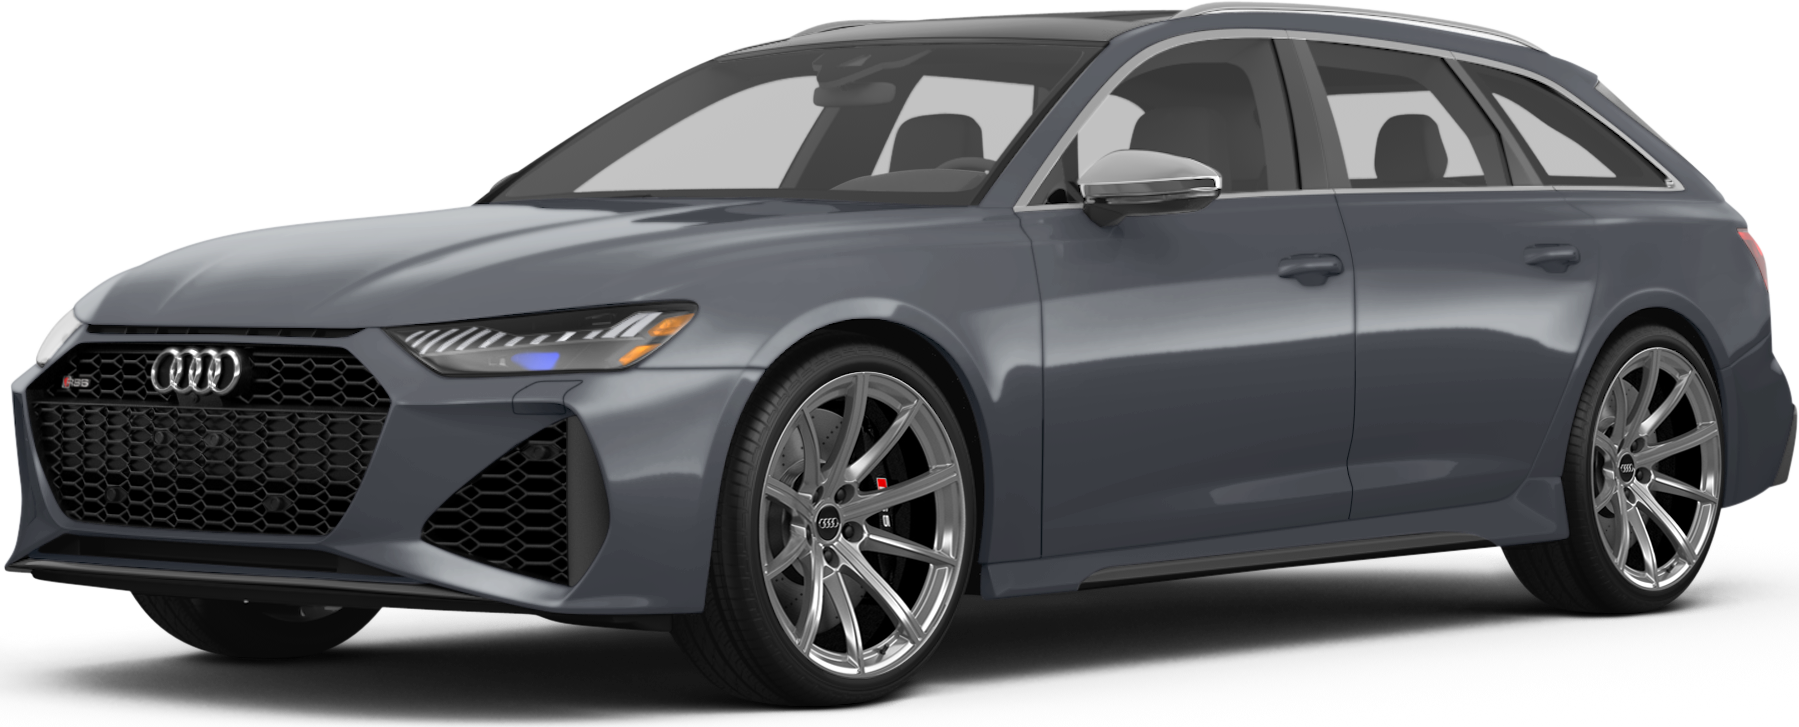 https://file.kelleybluebookimages.com/kbb/base/evox/CP/53247/2024-Audi-RS%206-front_53247_032_1799x727_6Y6Y_cropped.png